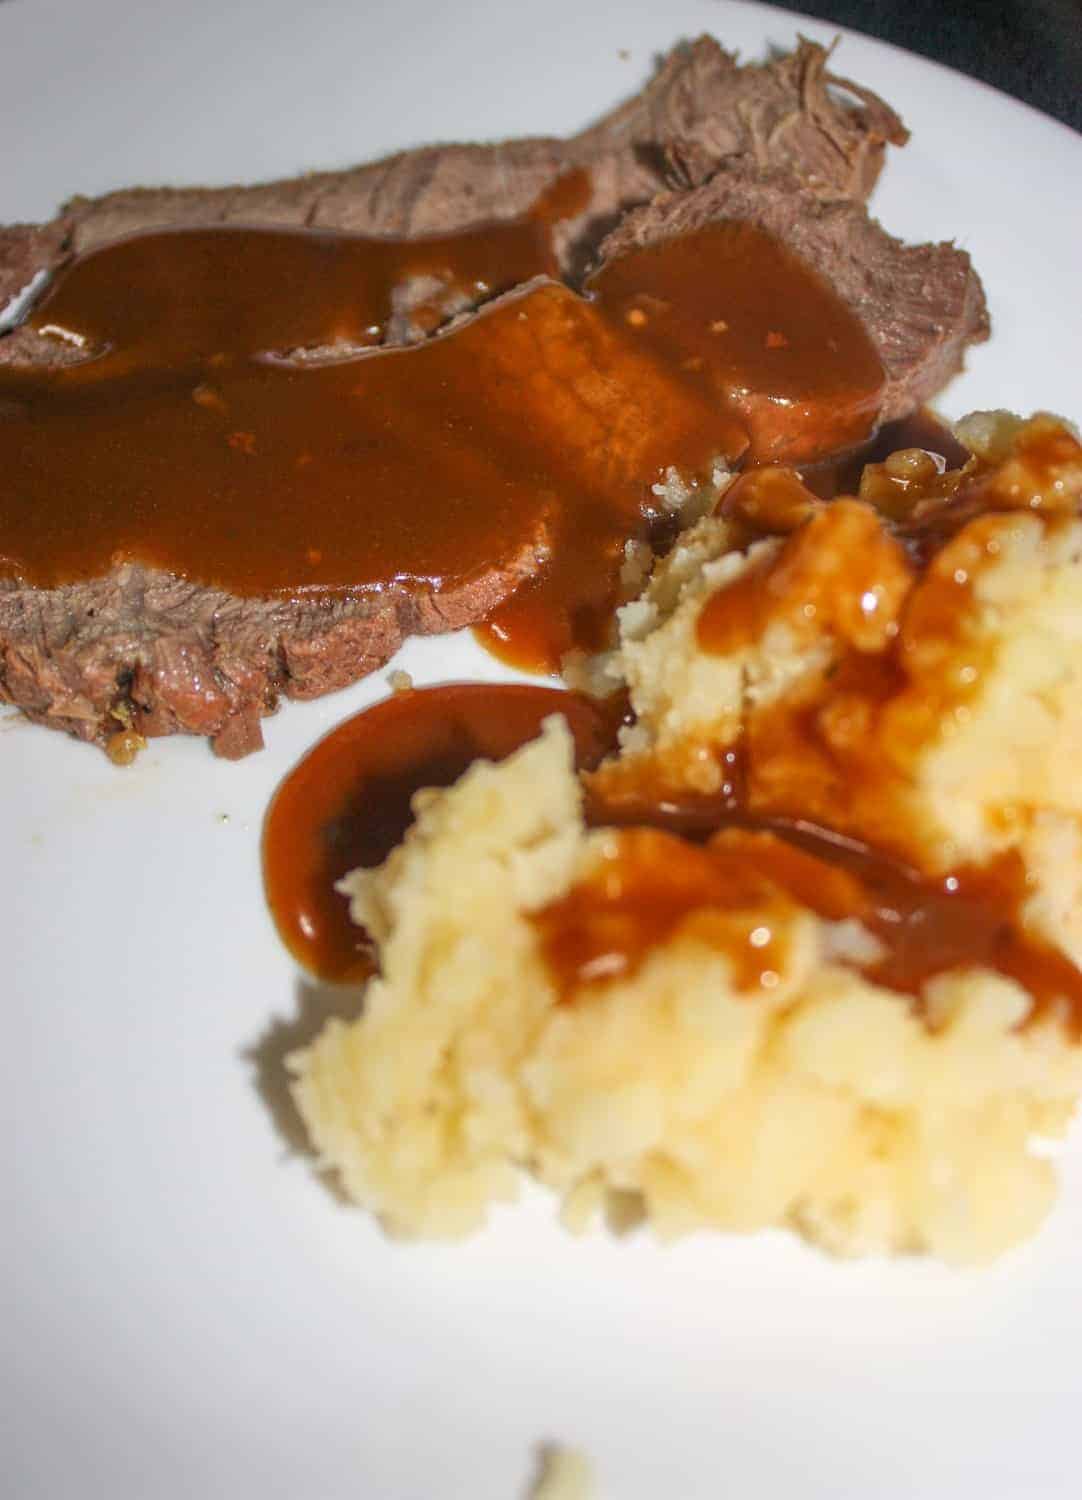 Sunday dinners can be done any day of the week when you have an Instant Pot. Try this instant roast sirloin with mashed potatoes and people will think you've been cooking for hours!